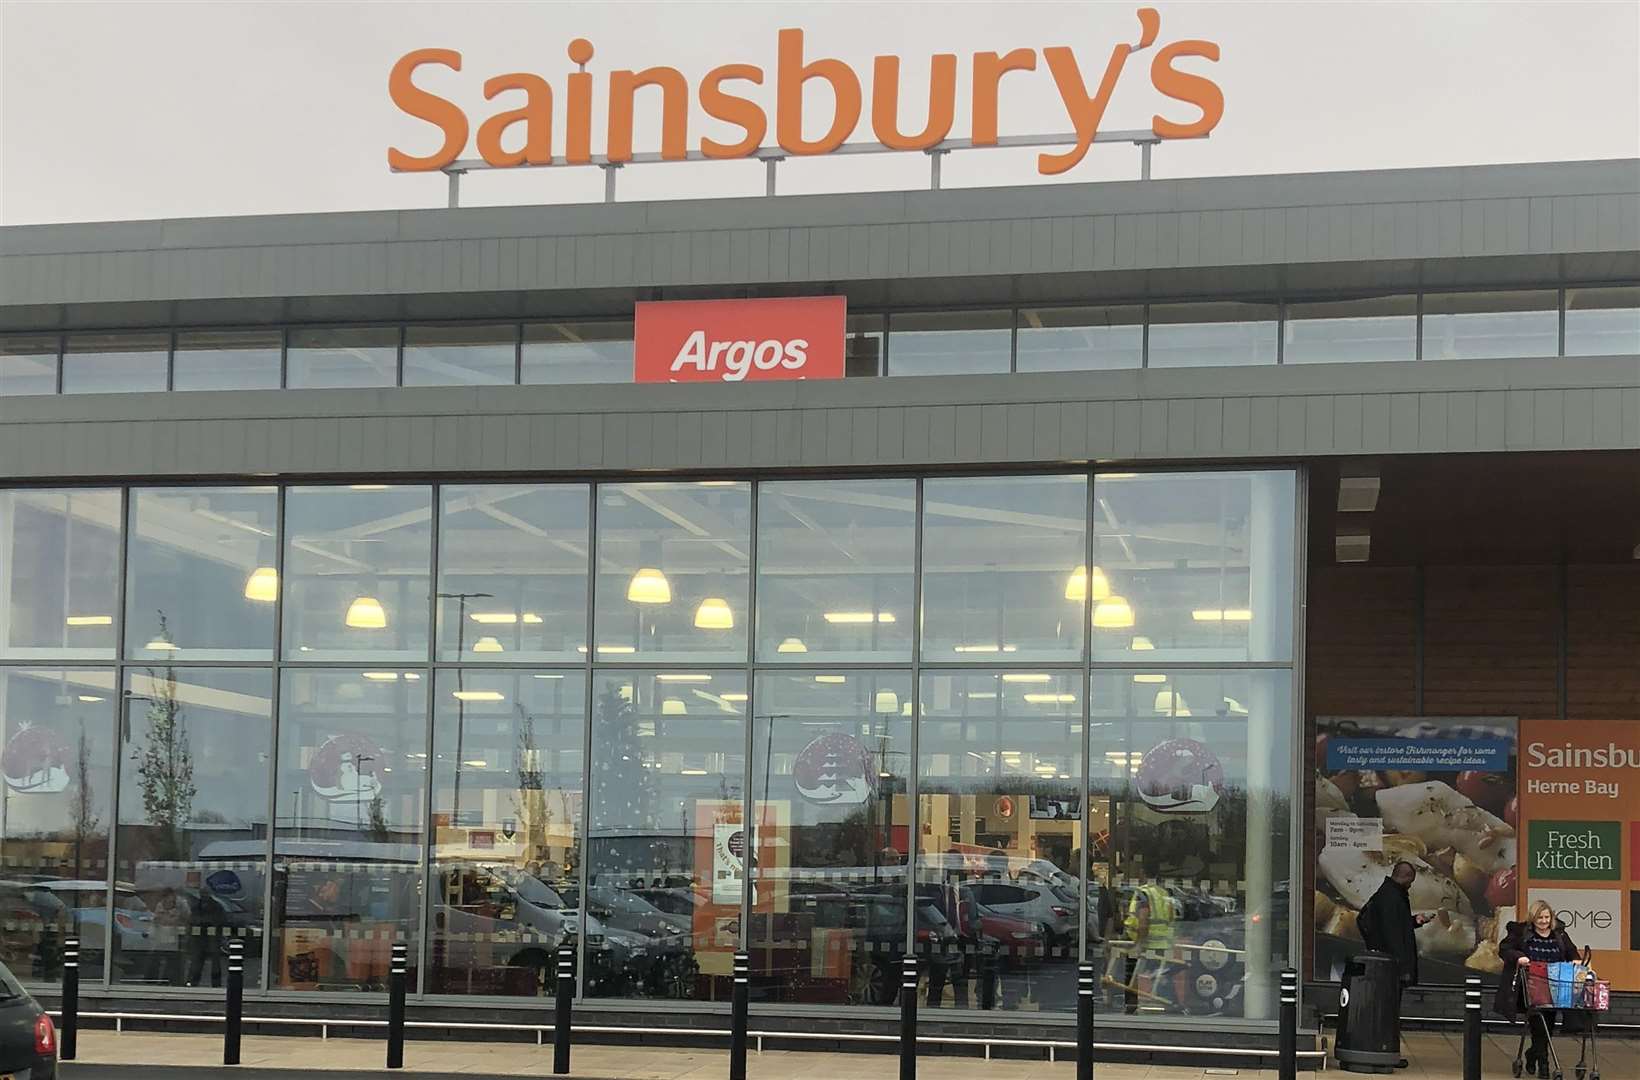 The Sainsbury's in Broomfield, Herne Bay